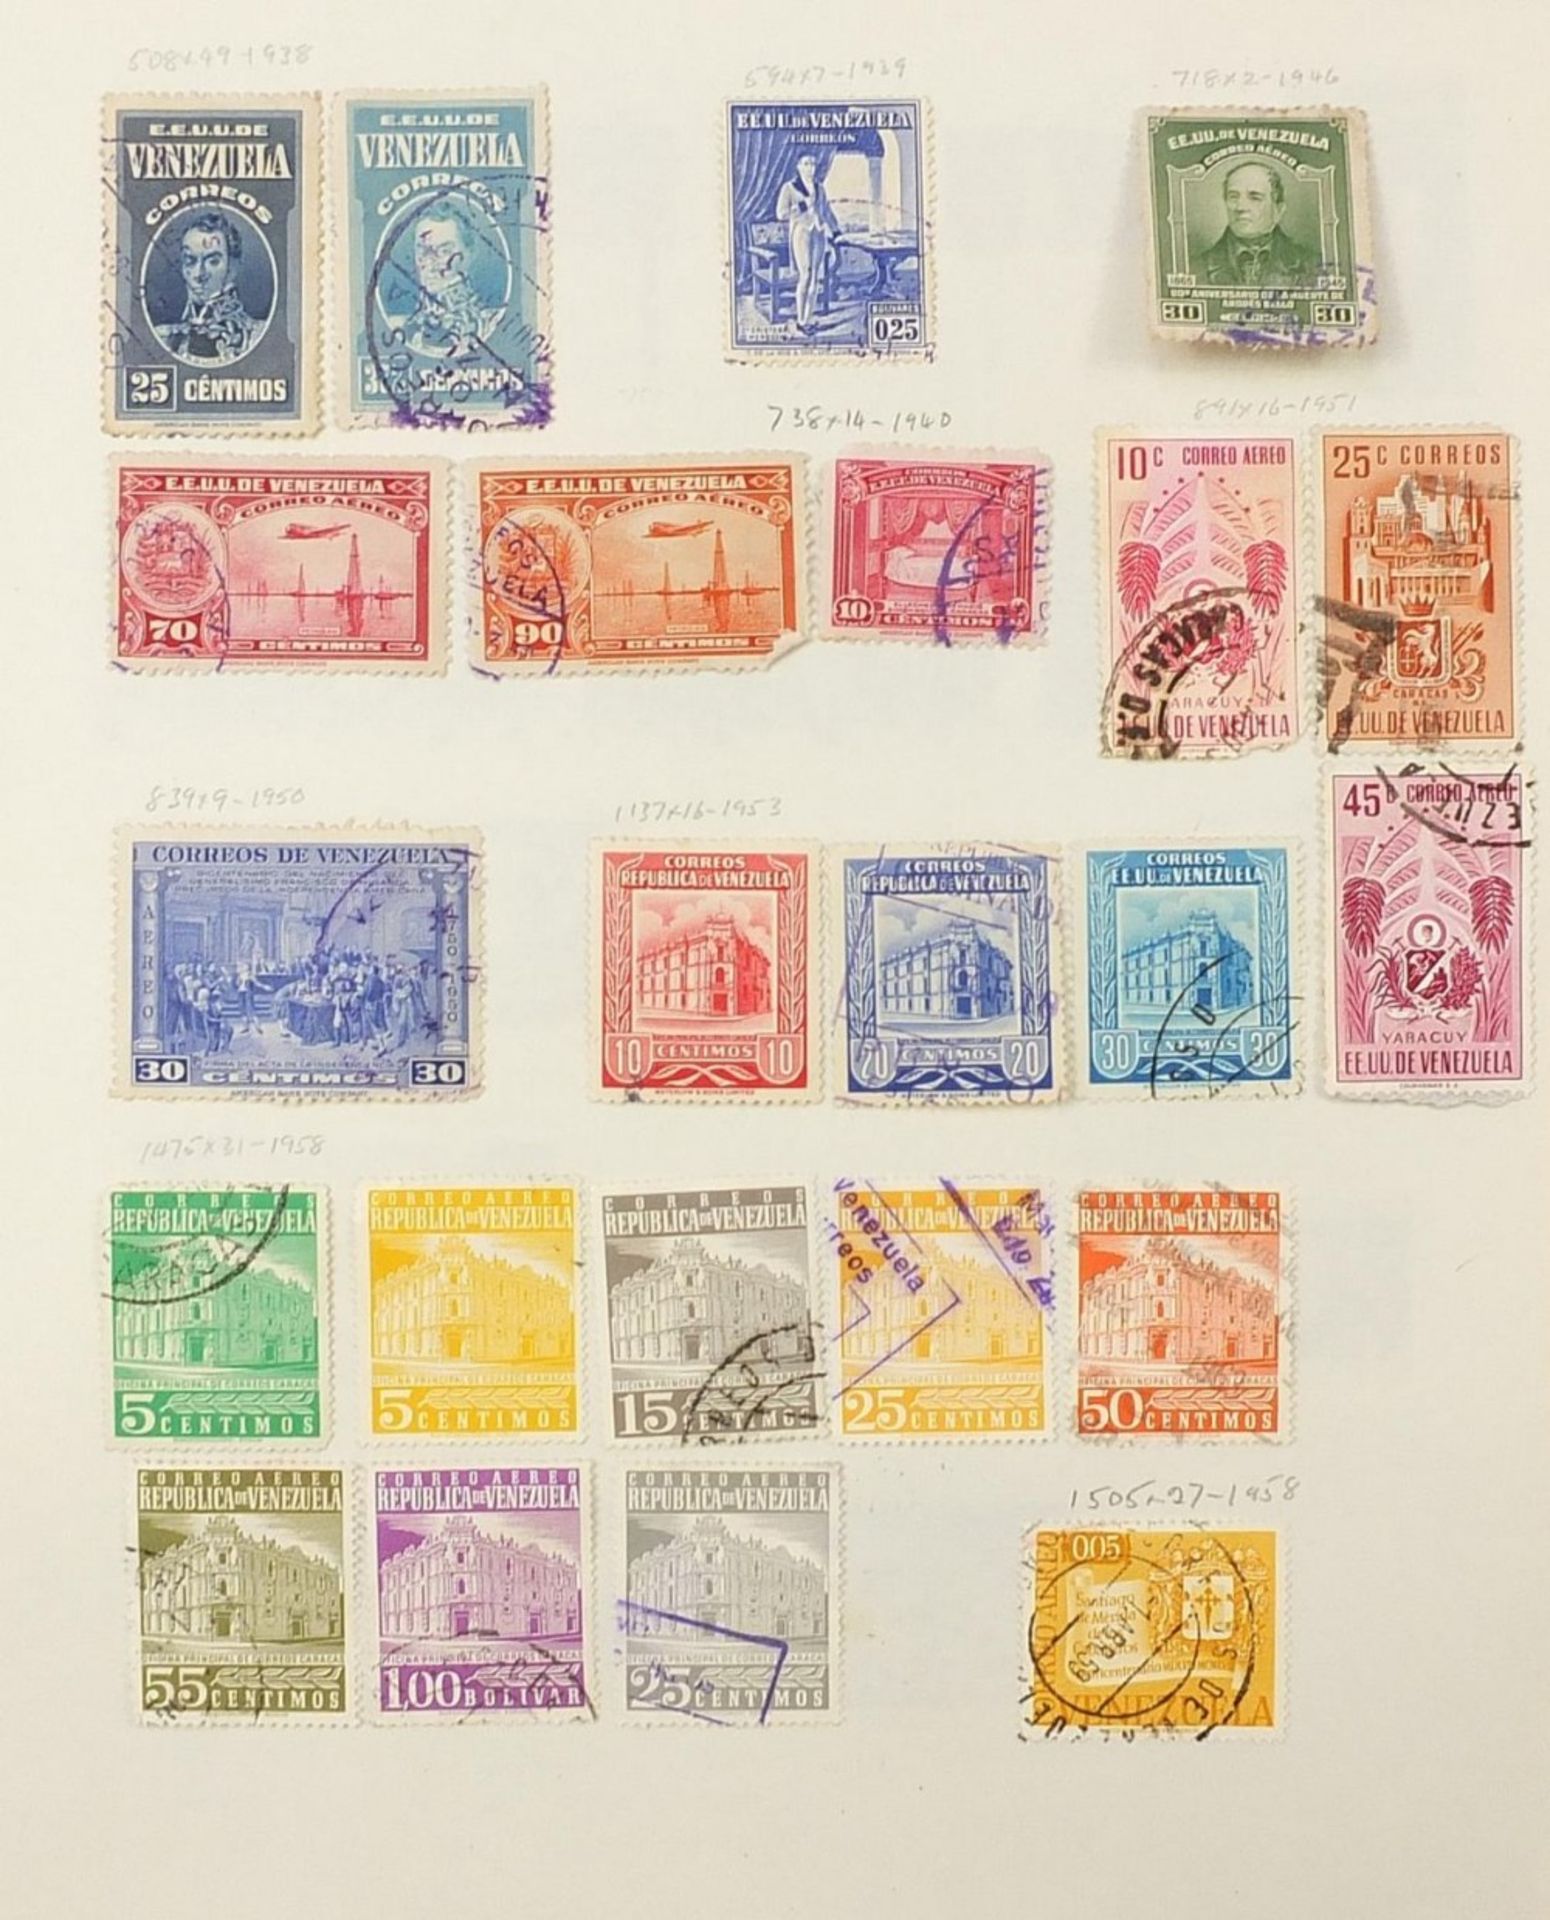 Extensive collection of antique and later world stamps arranged in albums including Brazil, - Image 19 of 52